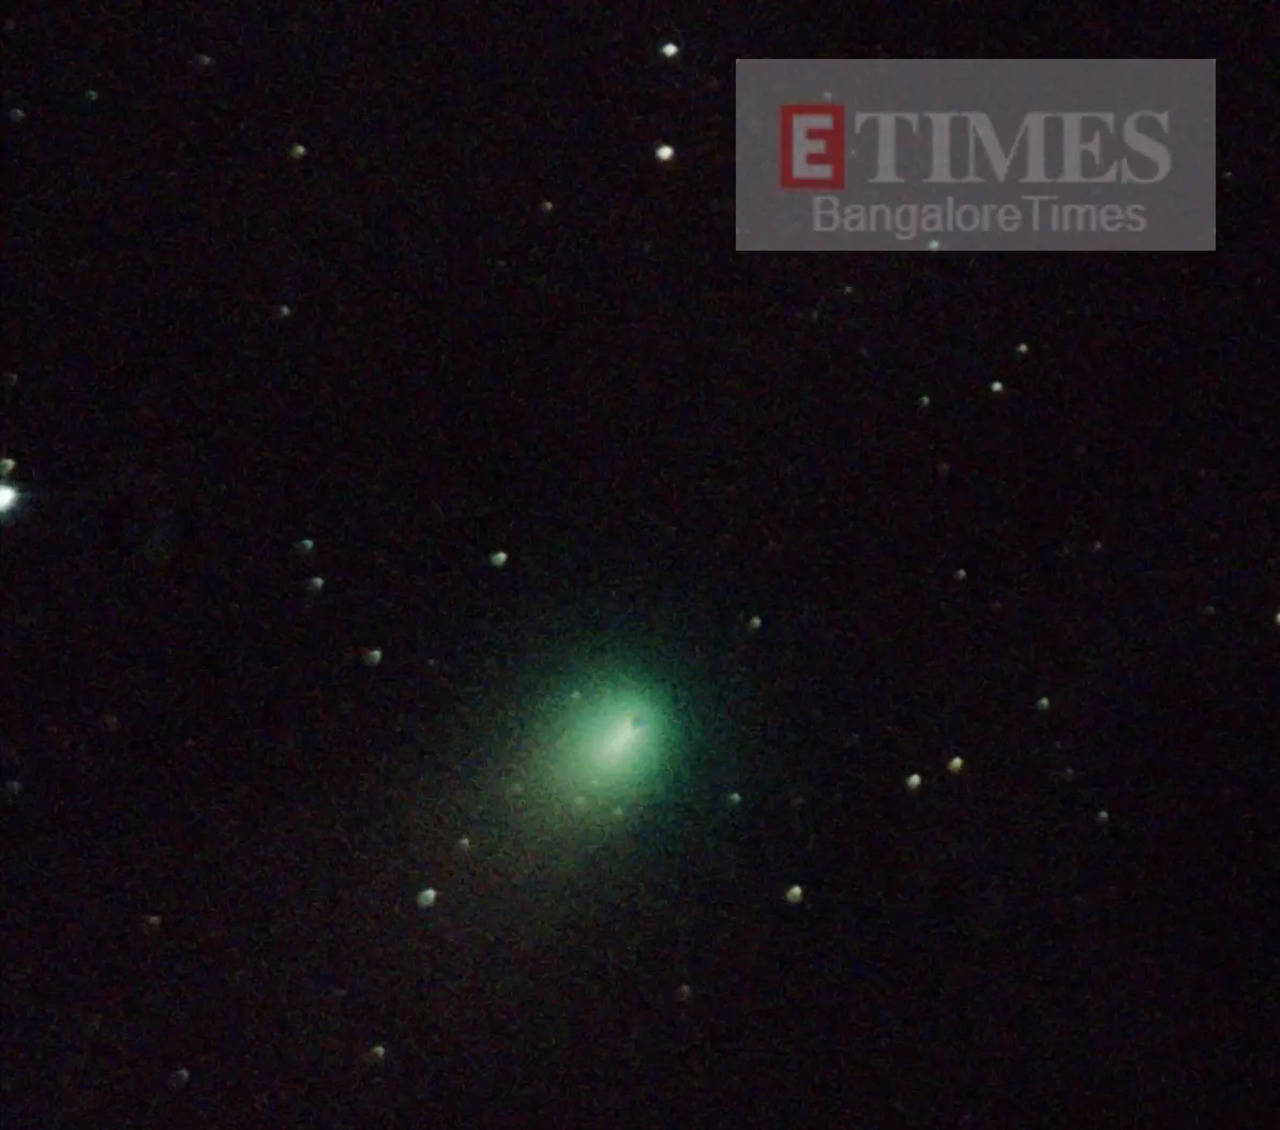 Bengaluru doctor captures a rare green comet that visits Earth every 50,000 years Events Movie News photo